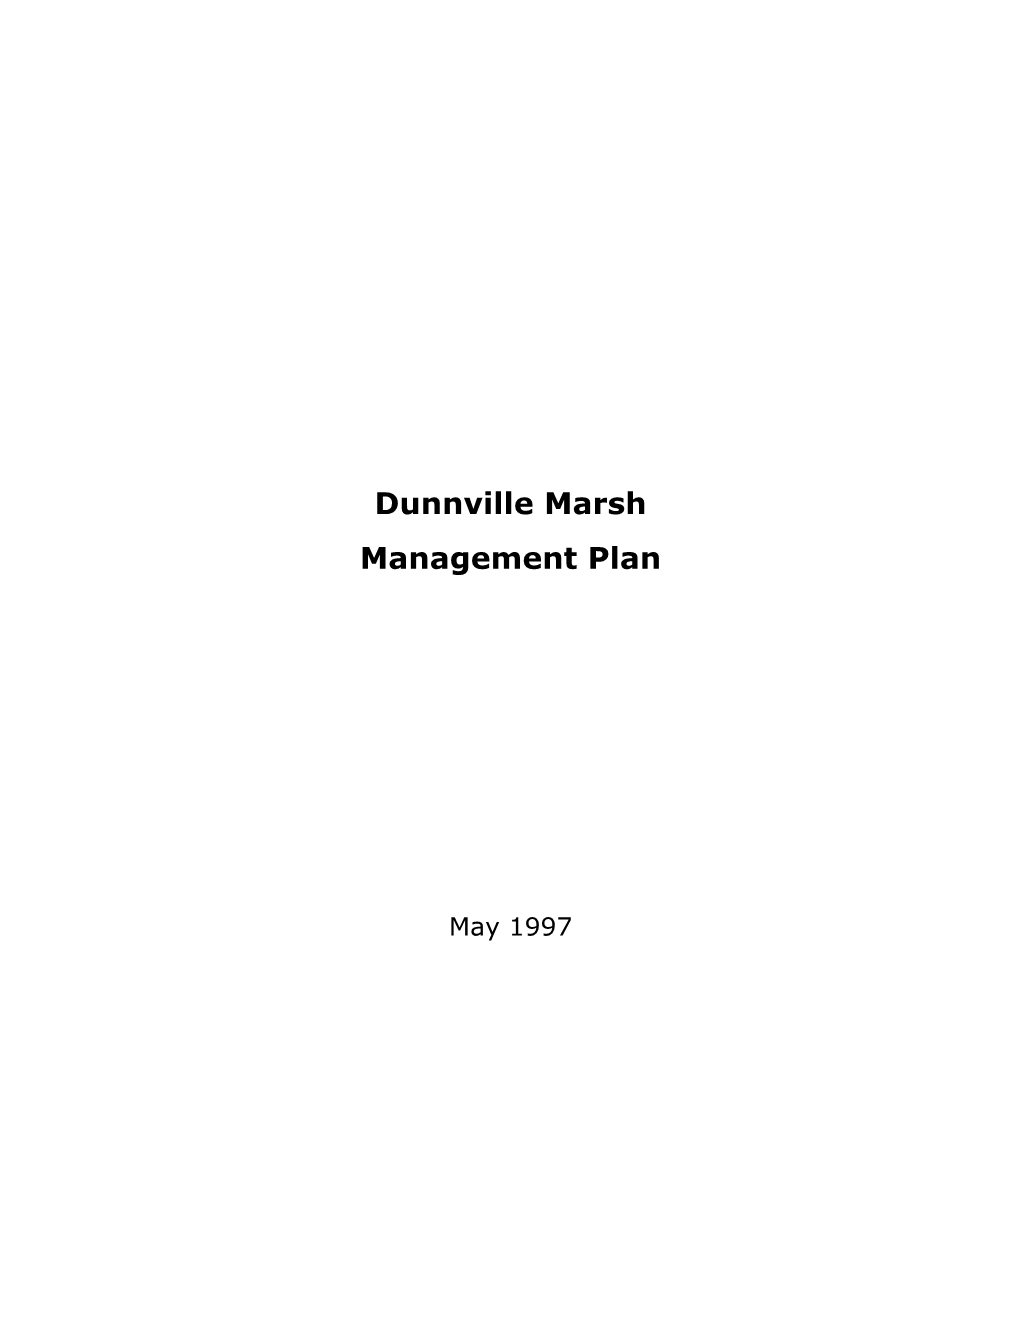 Dunnville Marsh Management Plan. May 1997